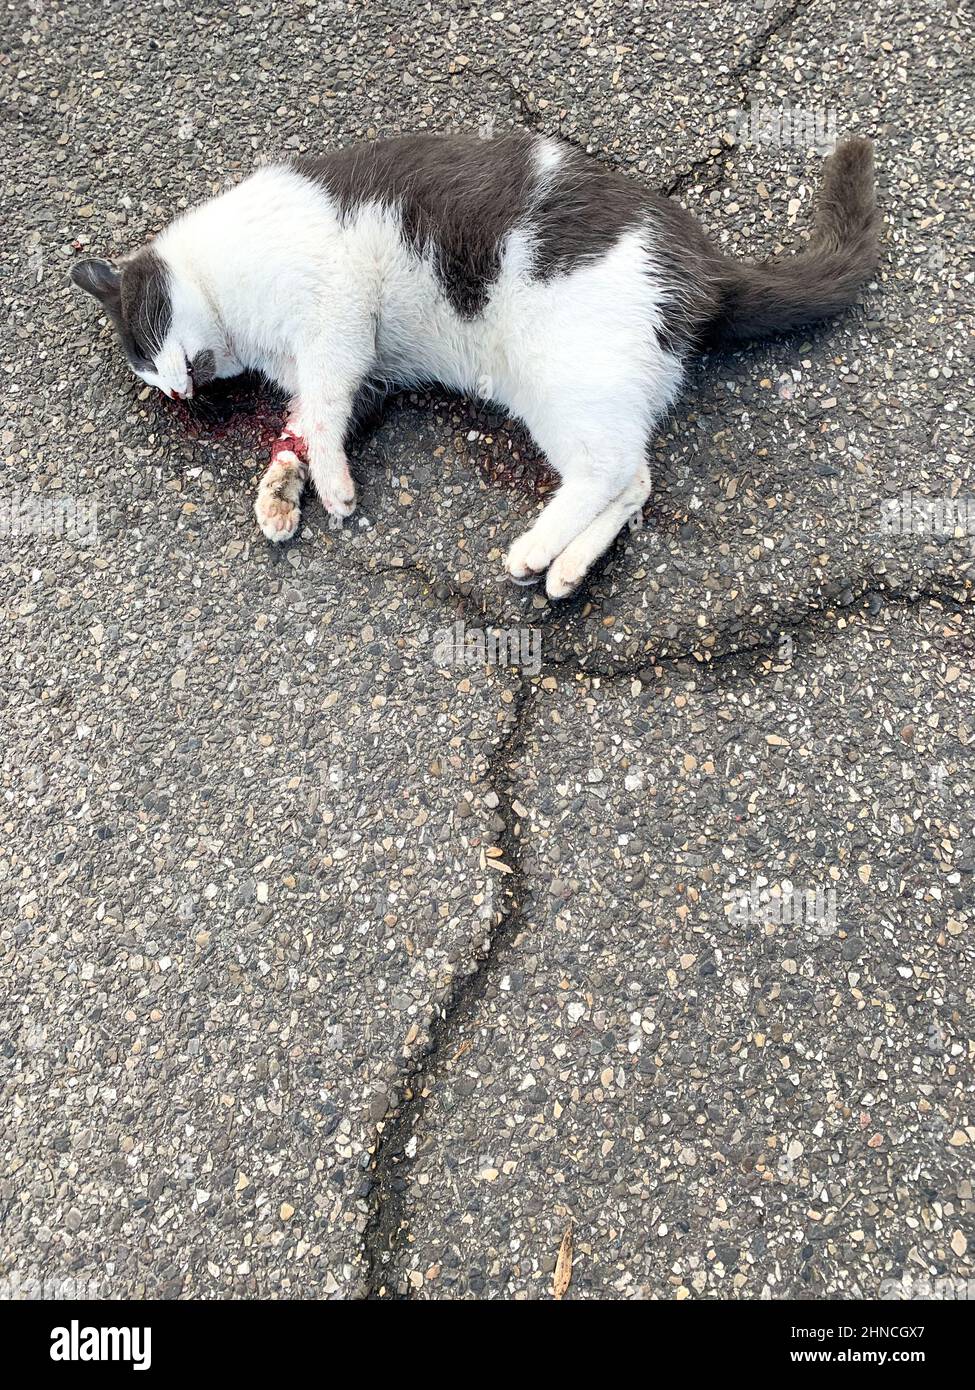 Dead cat laying on the ground, Lyon, France Stock Photo -